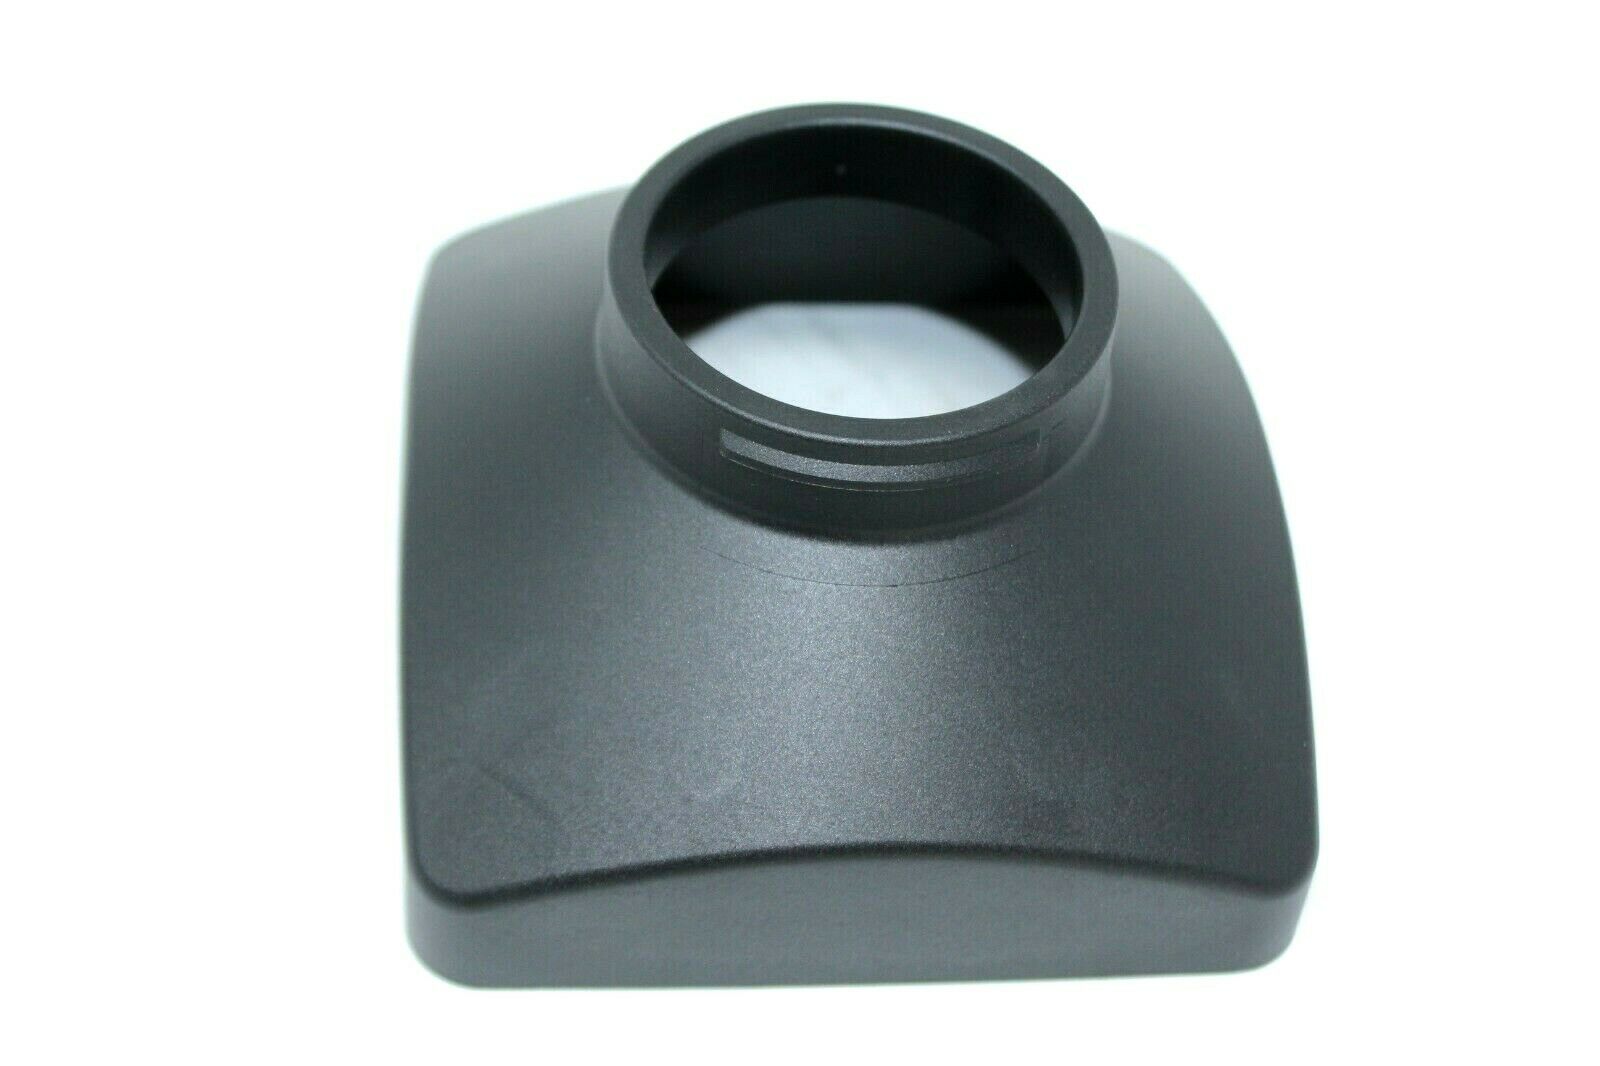 Webasto Case Air Inlet Cover For Airtop 2000Stc 9019552A Heater Part